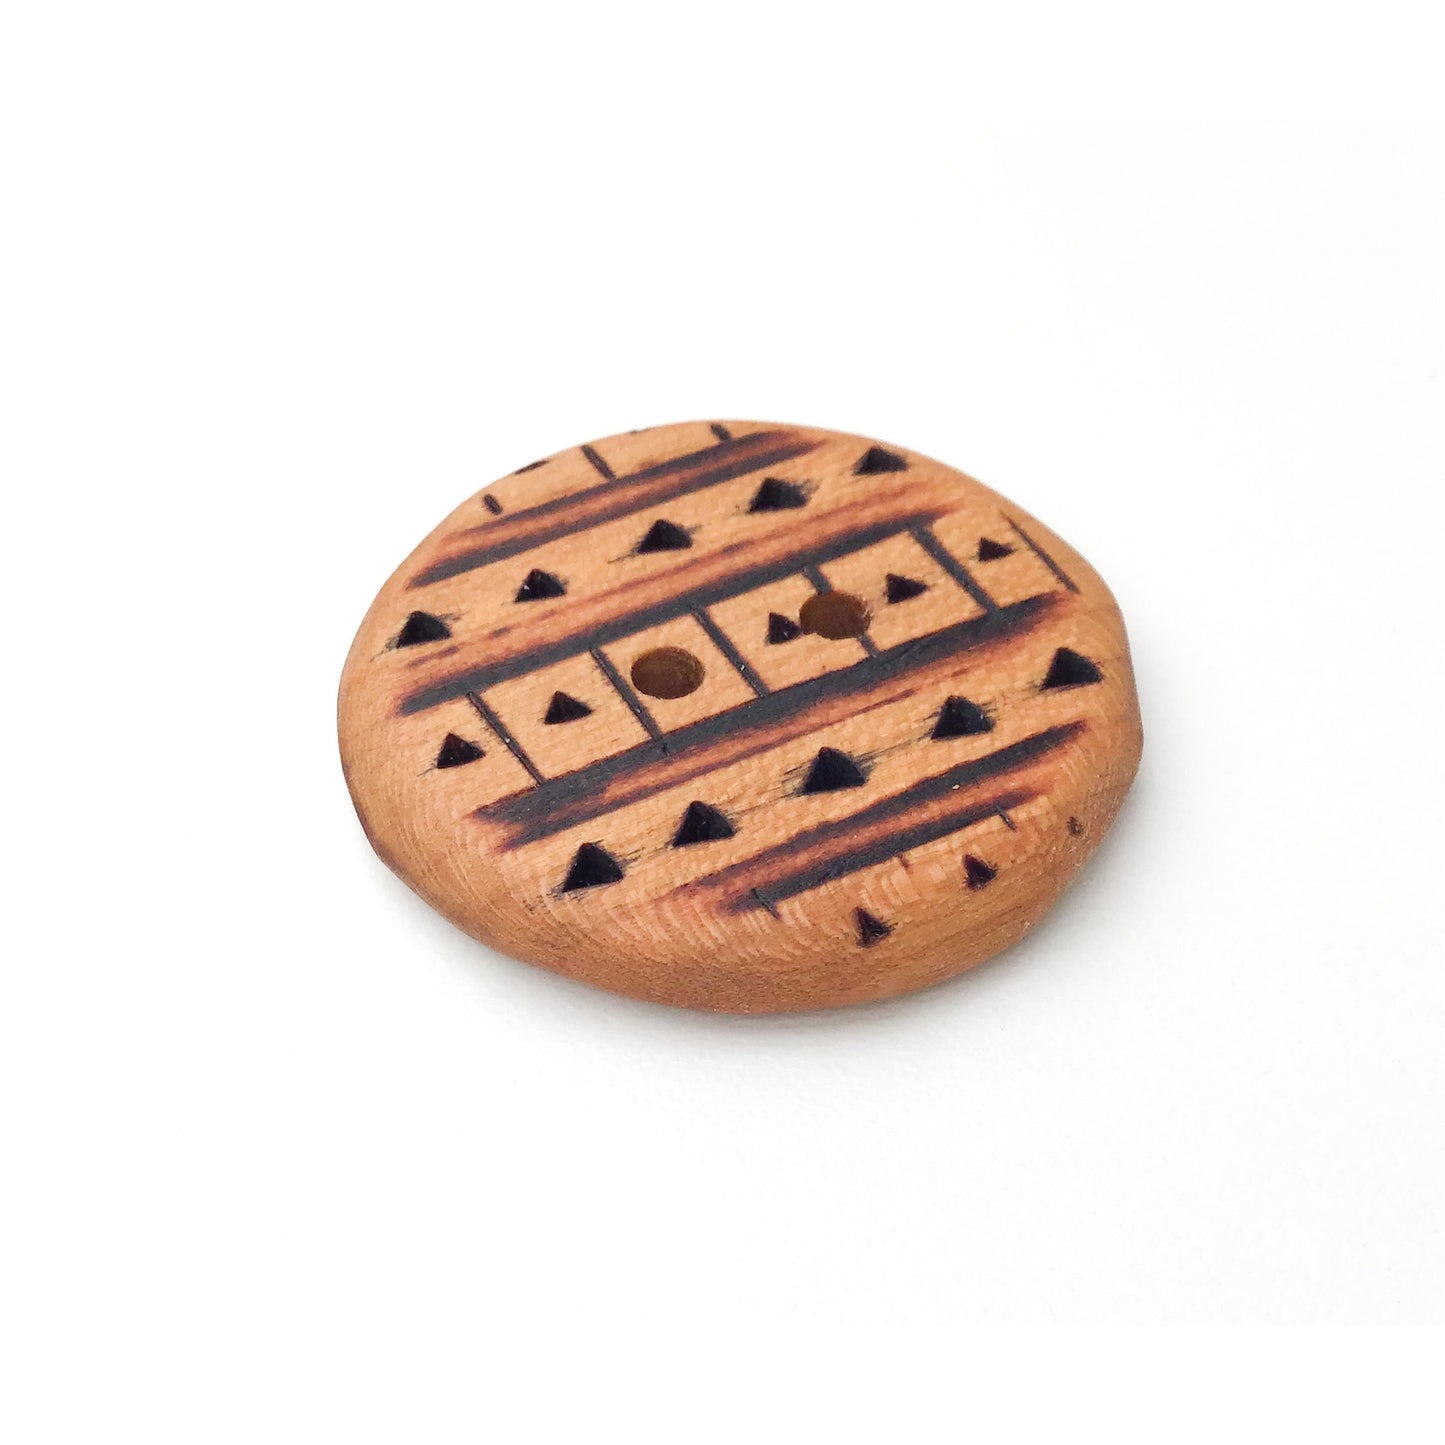 Large Cherry Wood Button - Decorative Wood Button - Pyrography - 1 3/8"